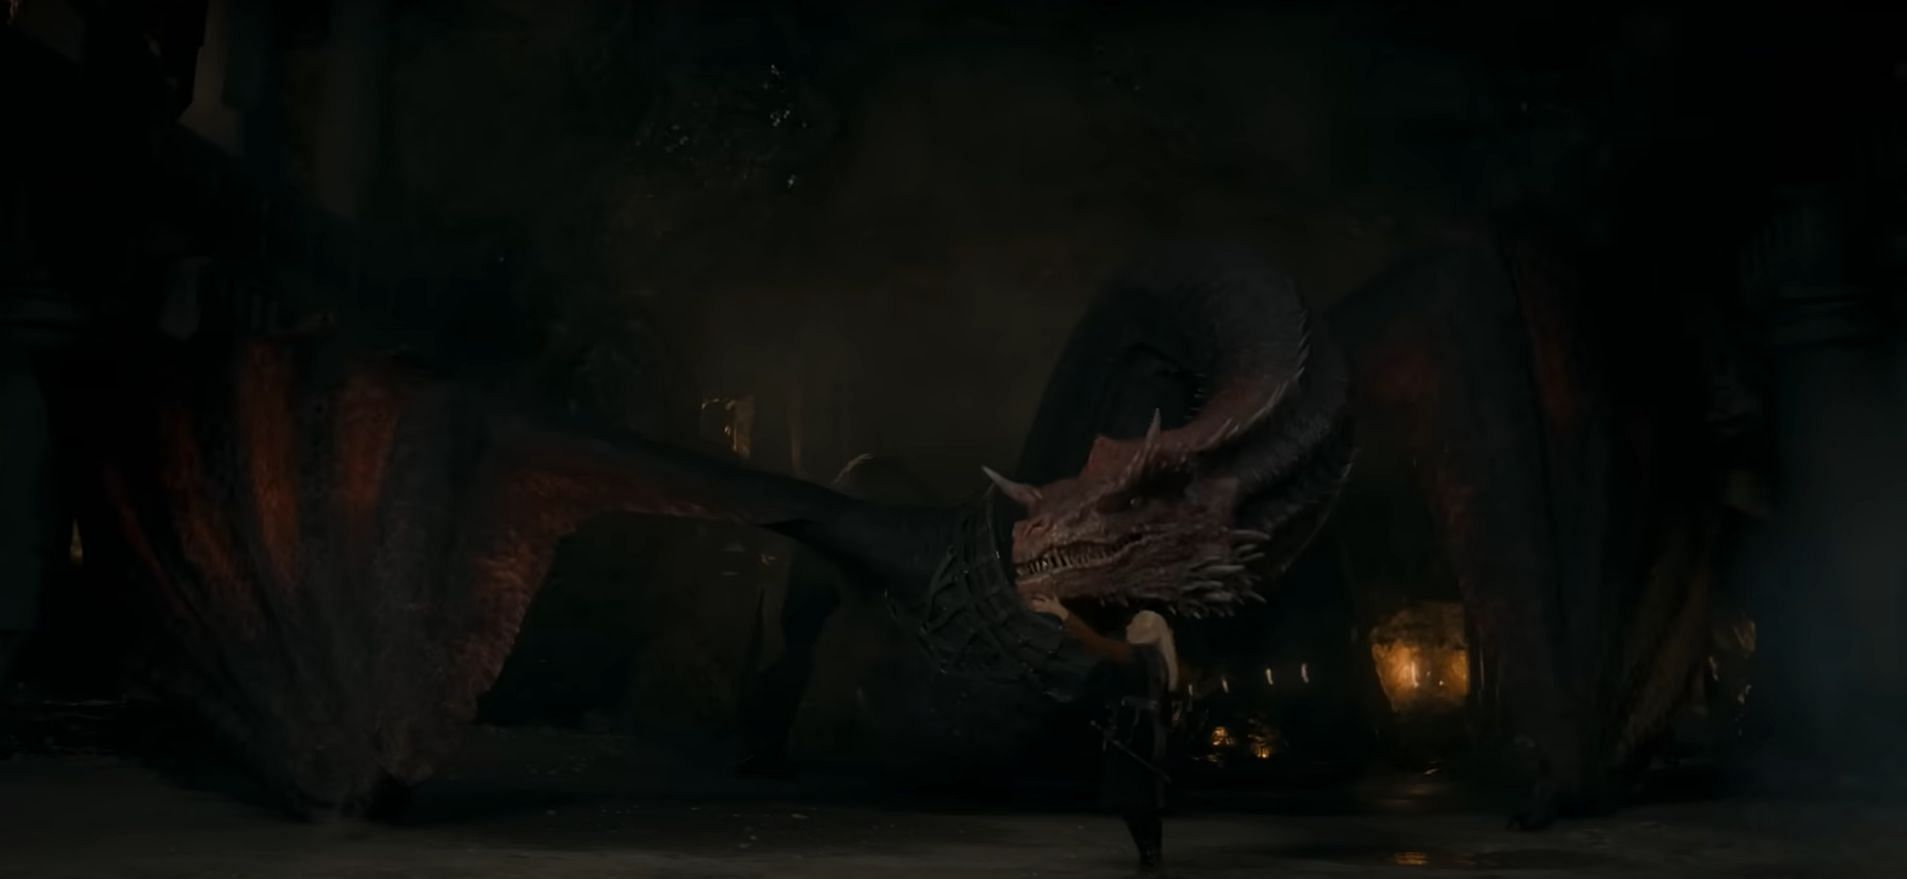 A still from House of the Dragon (Image via HBO)